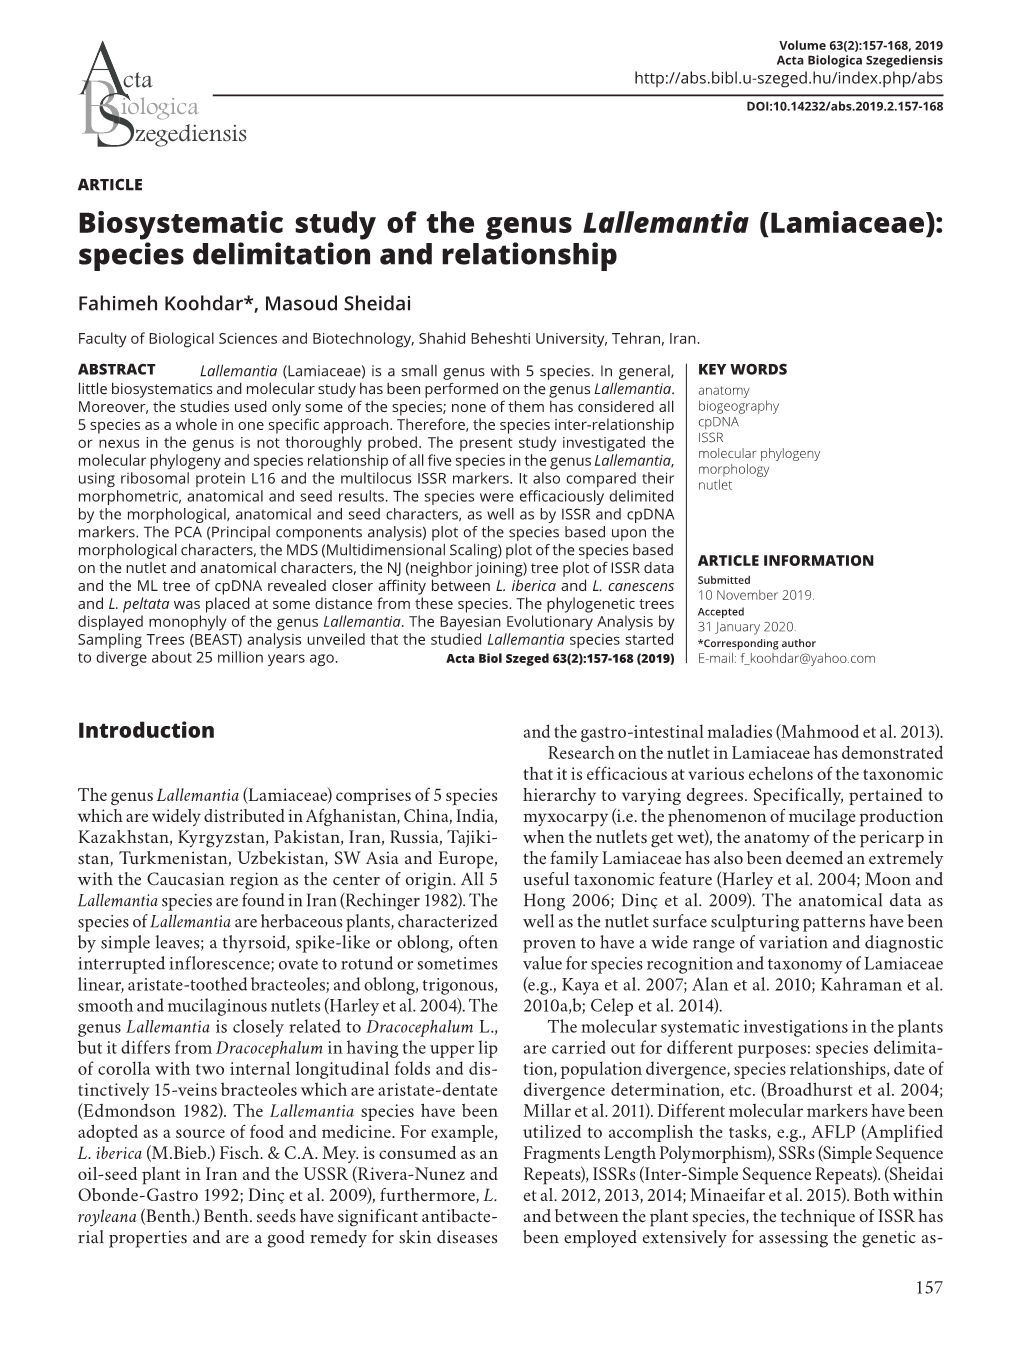 Biosystematic Study of the Genus Lallemantia (Lamiaceae): Species Delimitation and Relationship